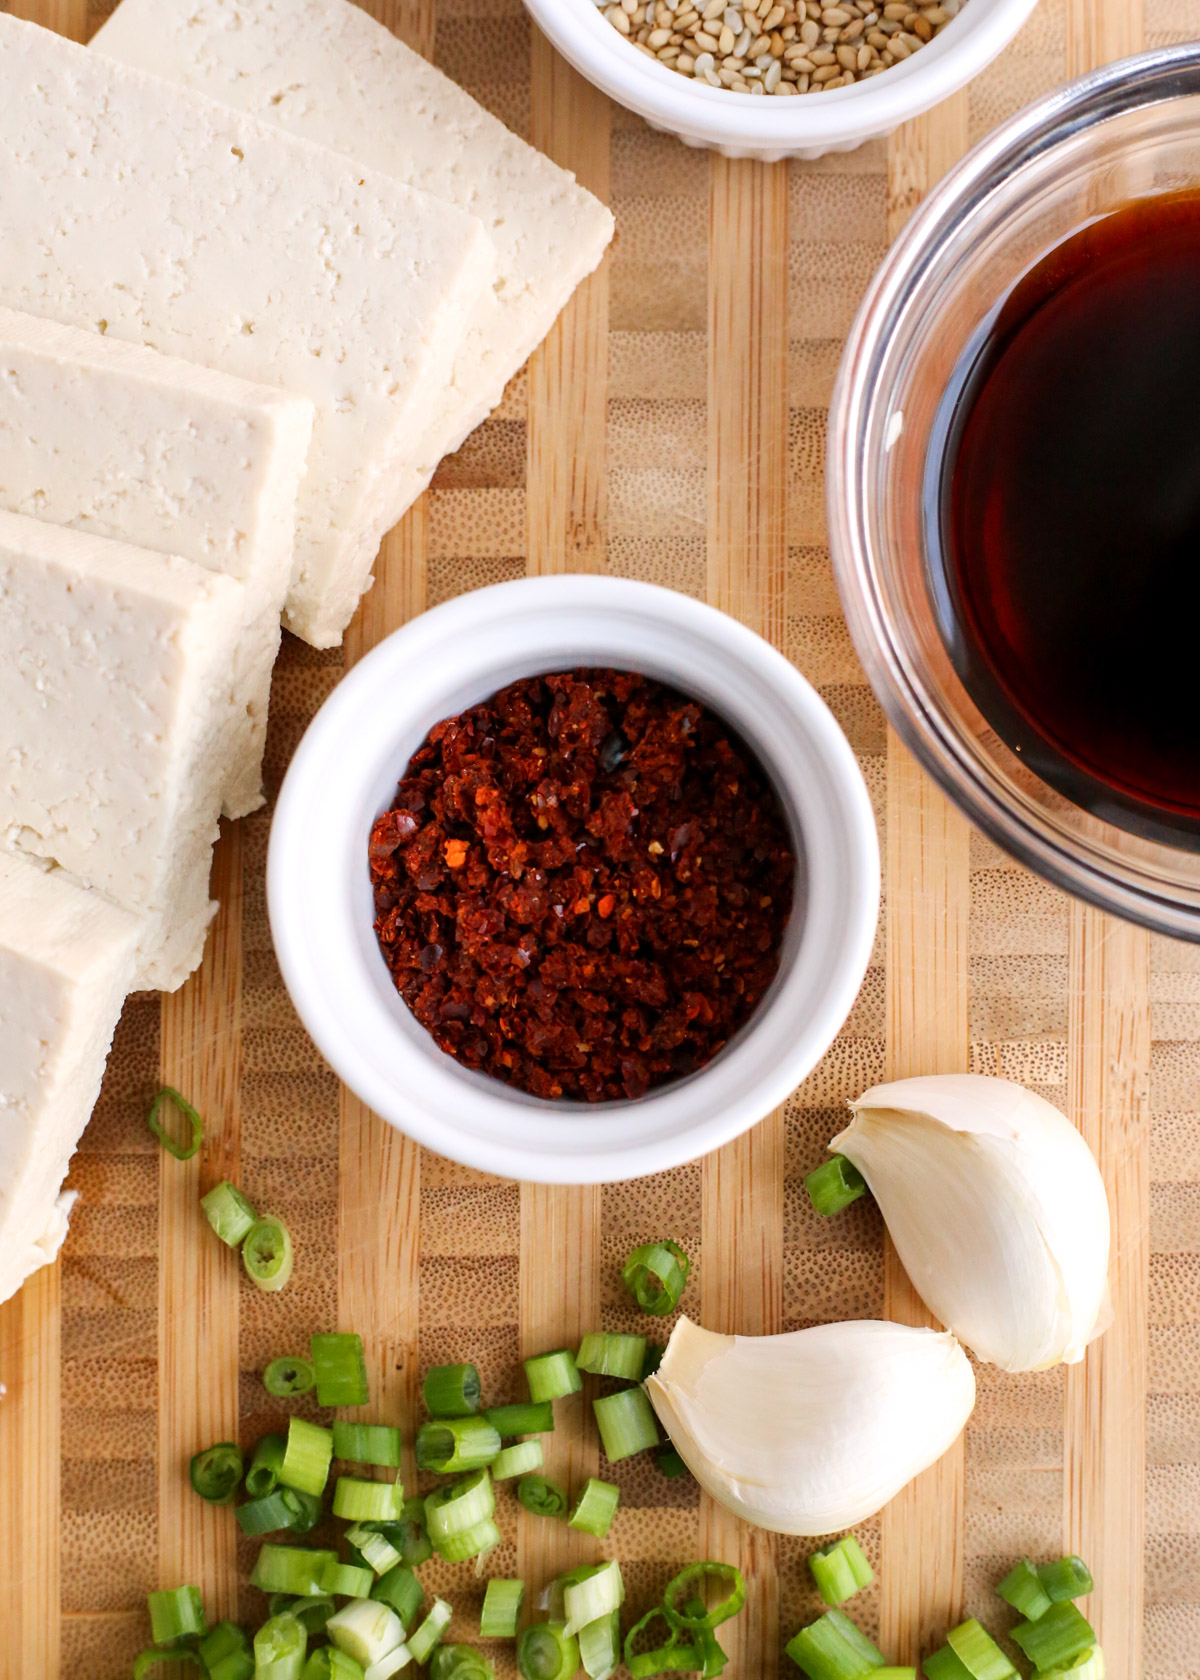 Overhead view of a small ramekin of gochugaru, Korean red chili pepper flakes, displayed on a wooden cutting board with sliced firm tofu, sliced green onions, garlic cloves, and sauce ingredients of dubu jorim